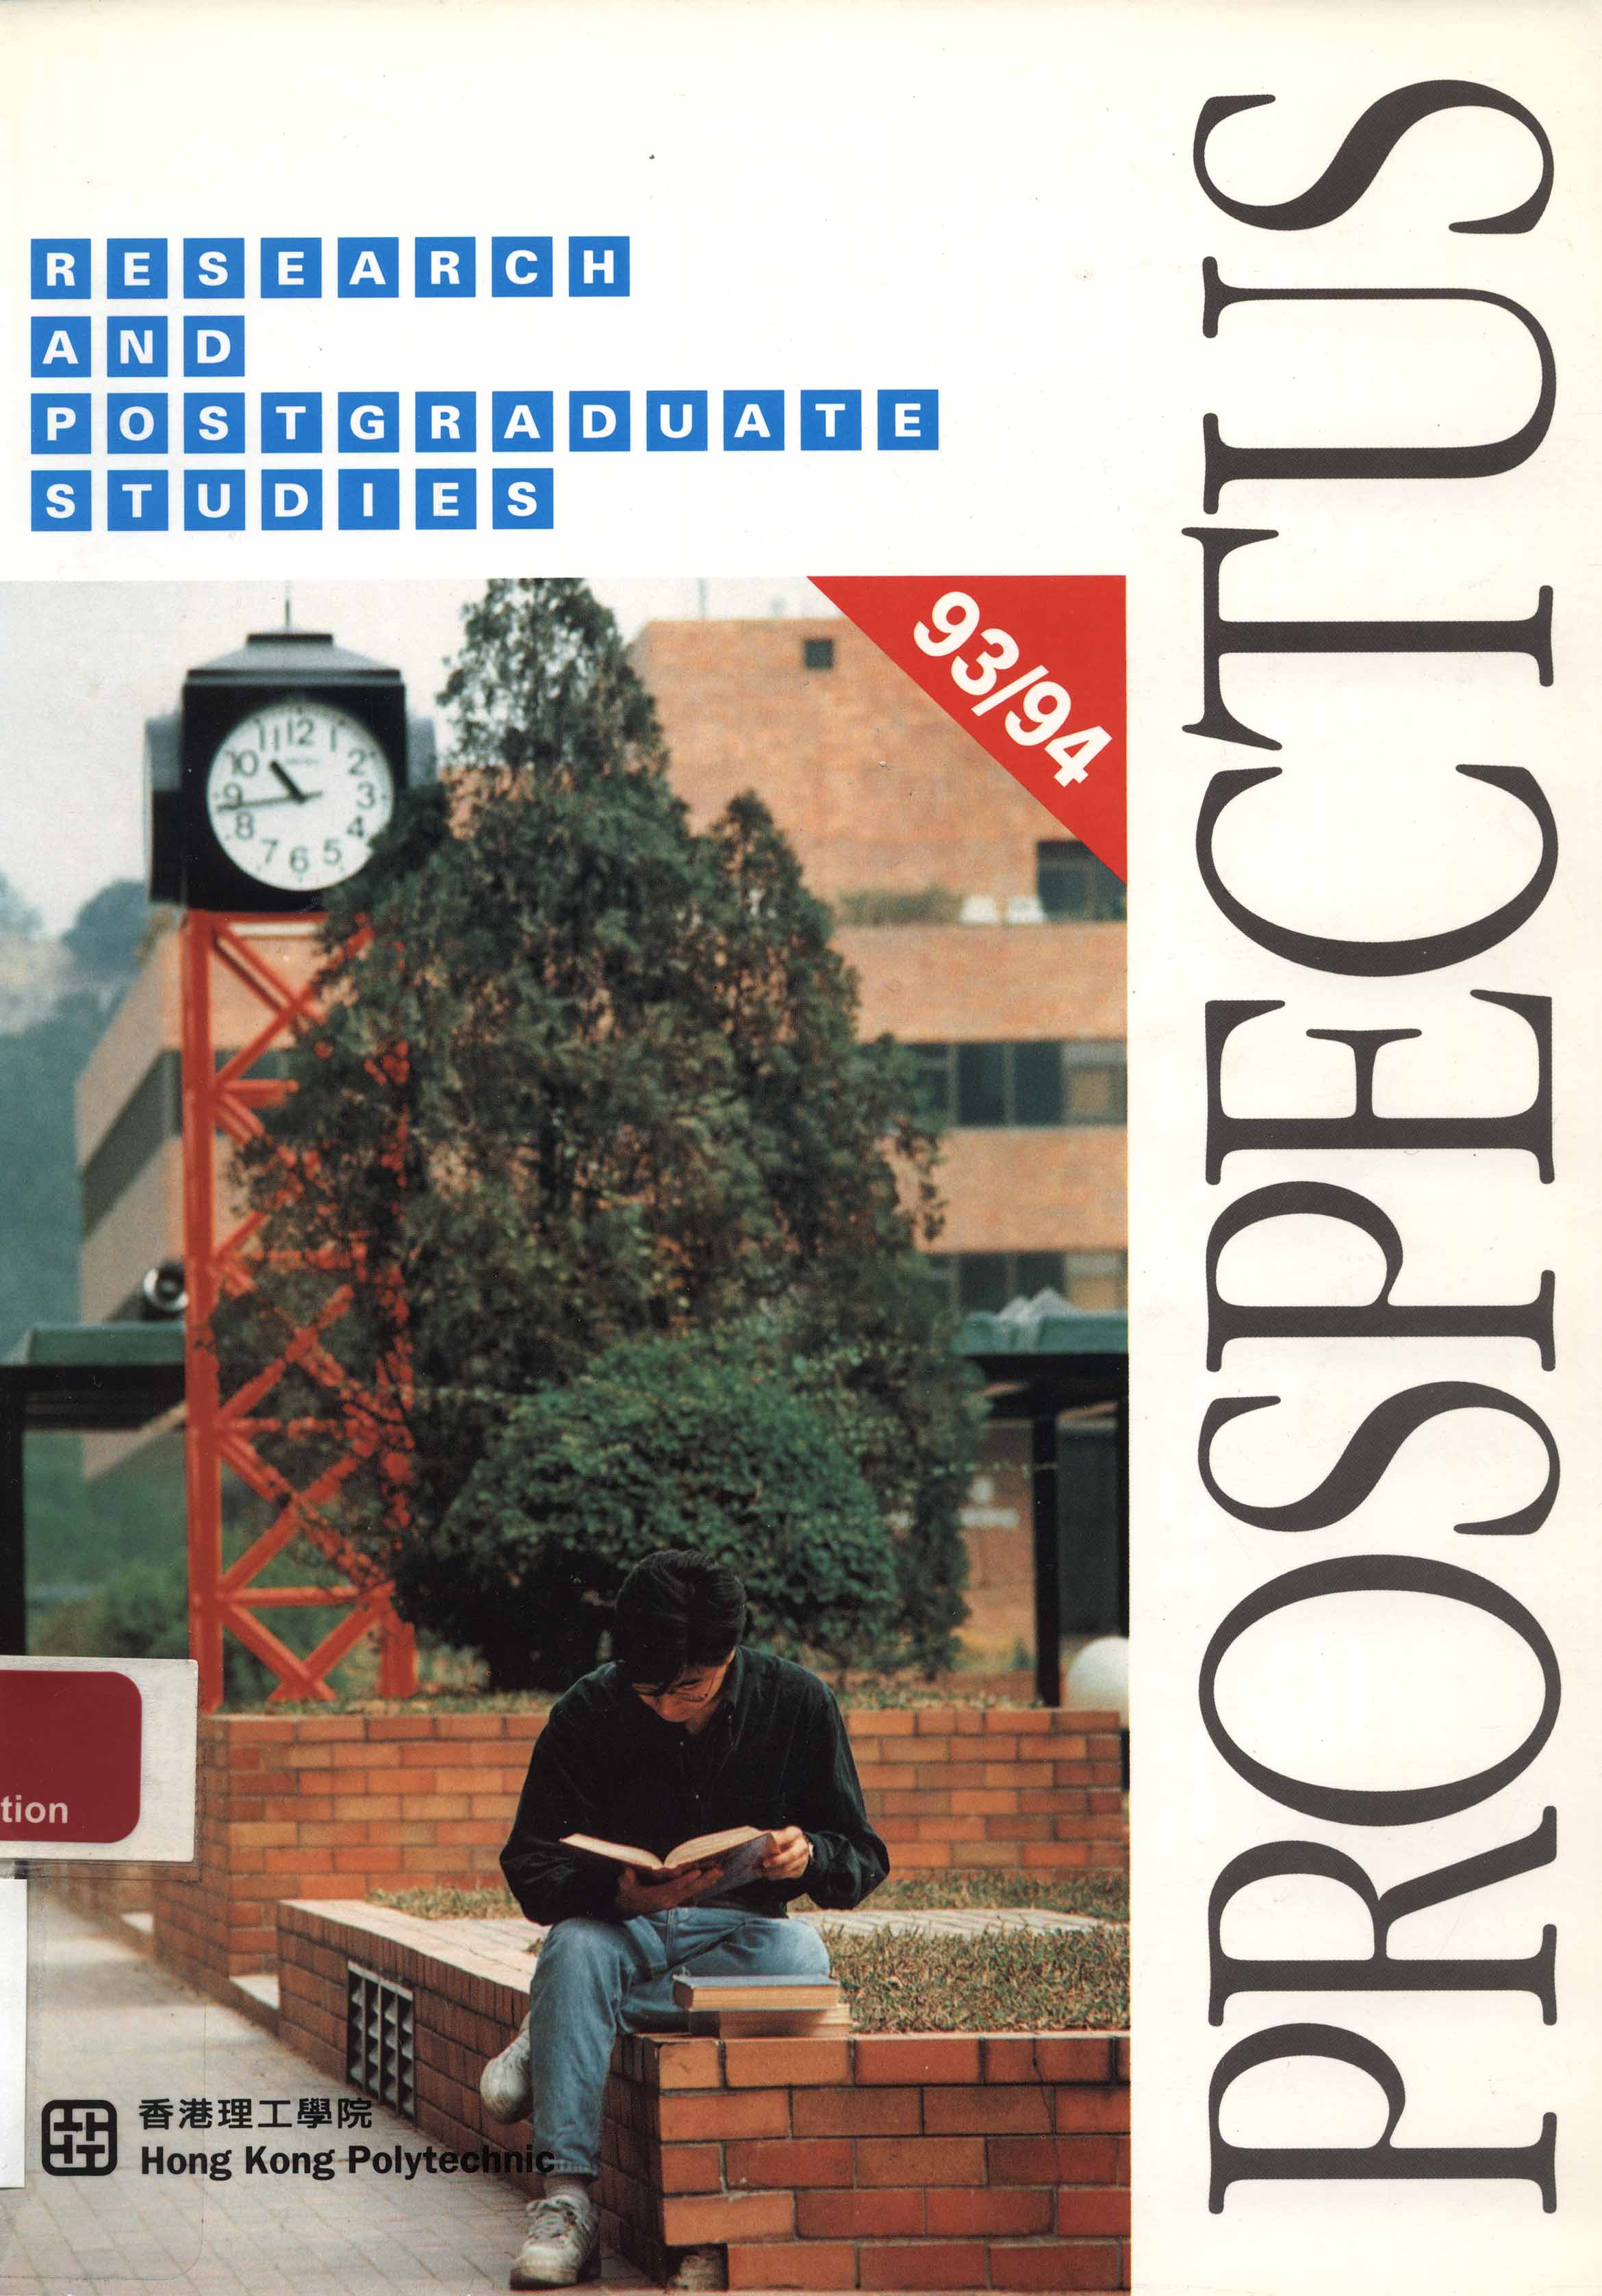 Hong Kong Polytechnic. Prospectus for research and postgraduate studies  [1993/94]